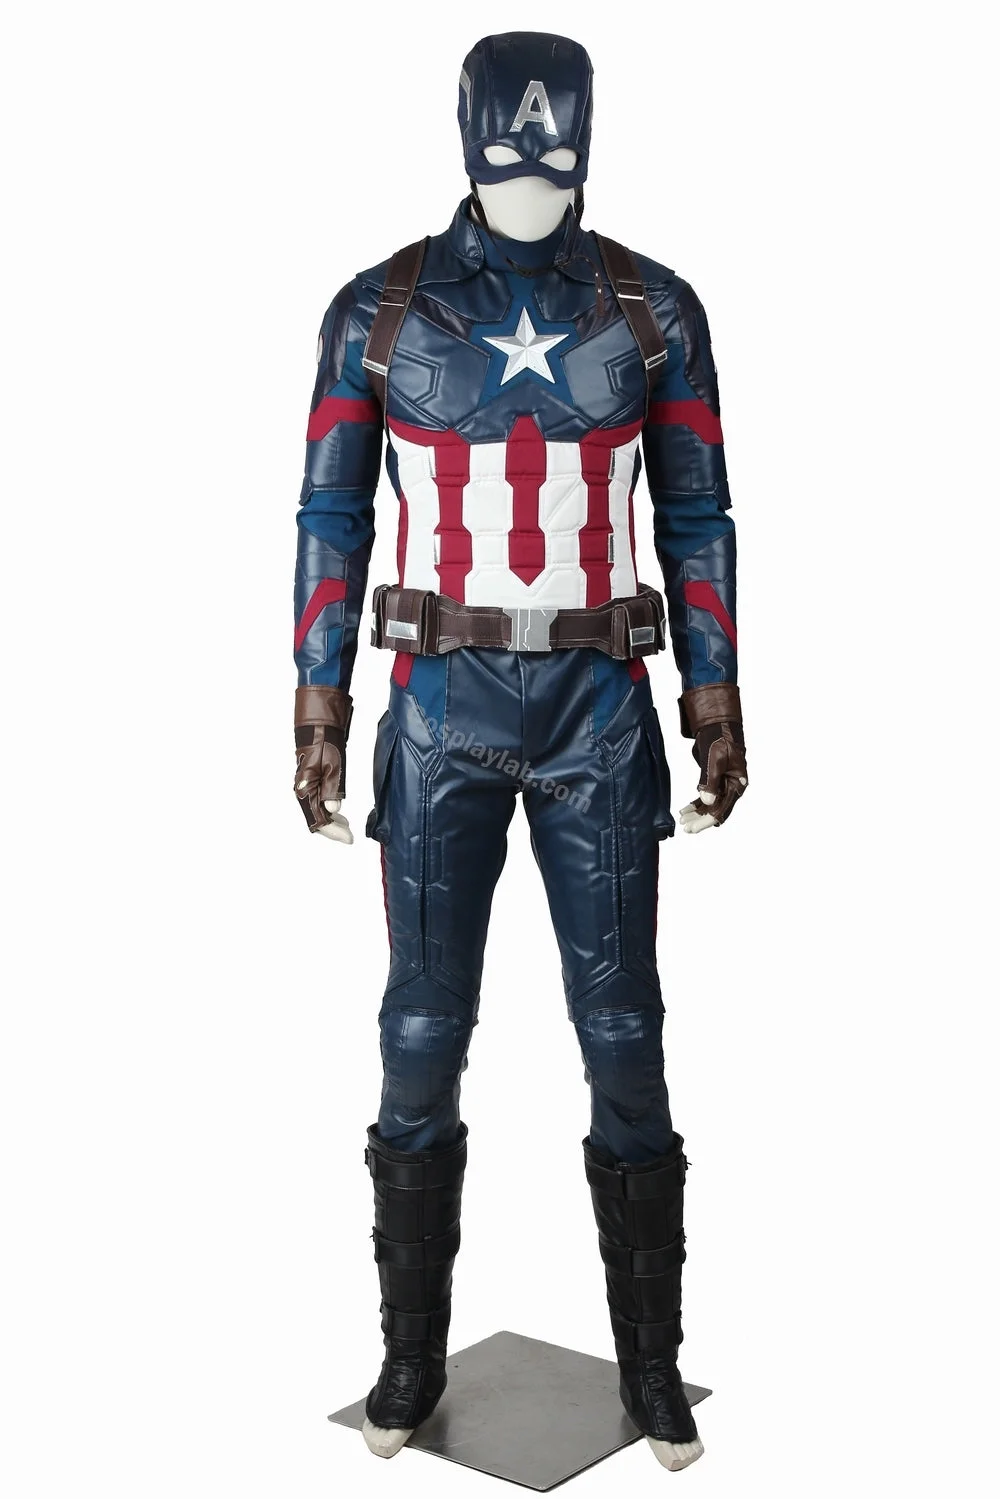 Captain America endgame civil war stealth new cosplay adult black suit outfit uniform By CosplayLab